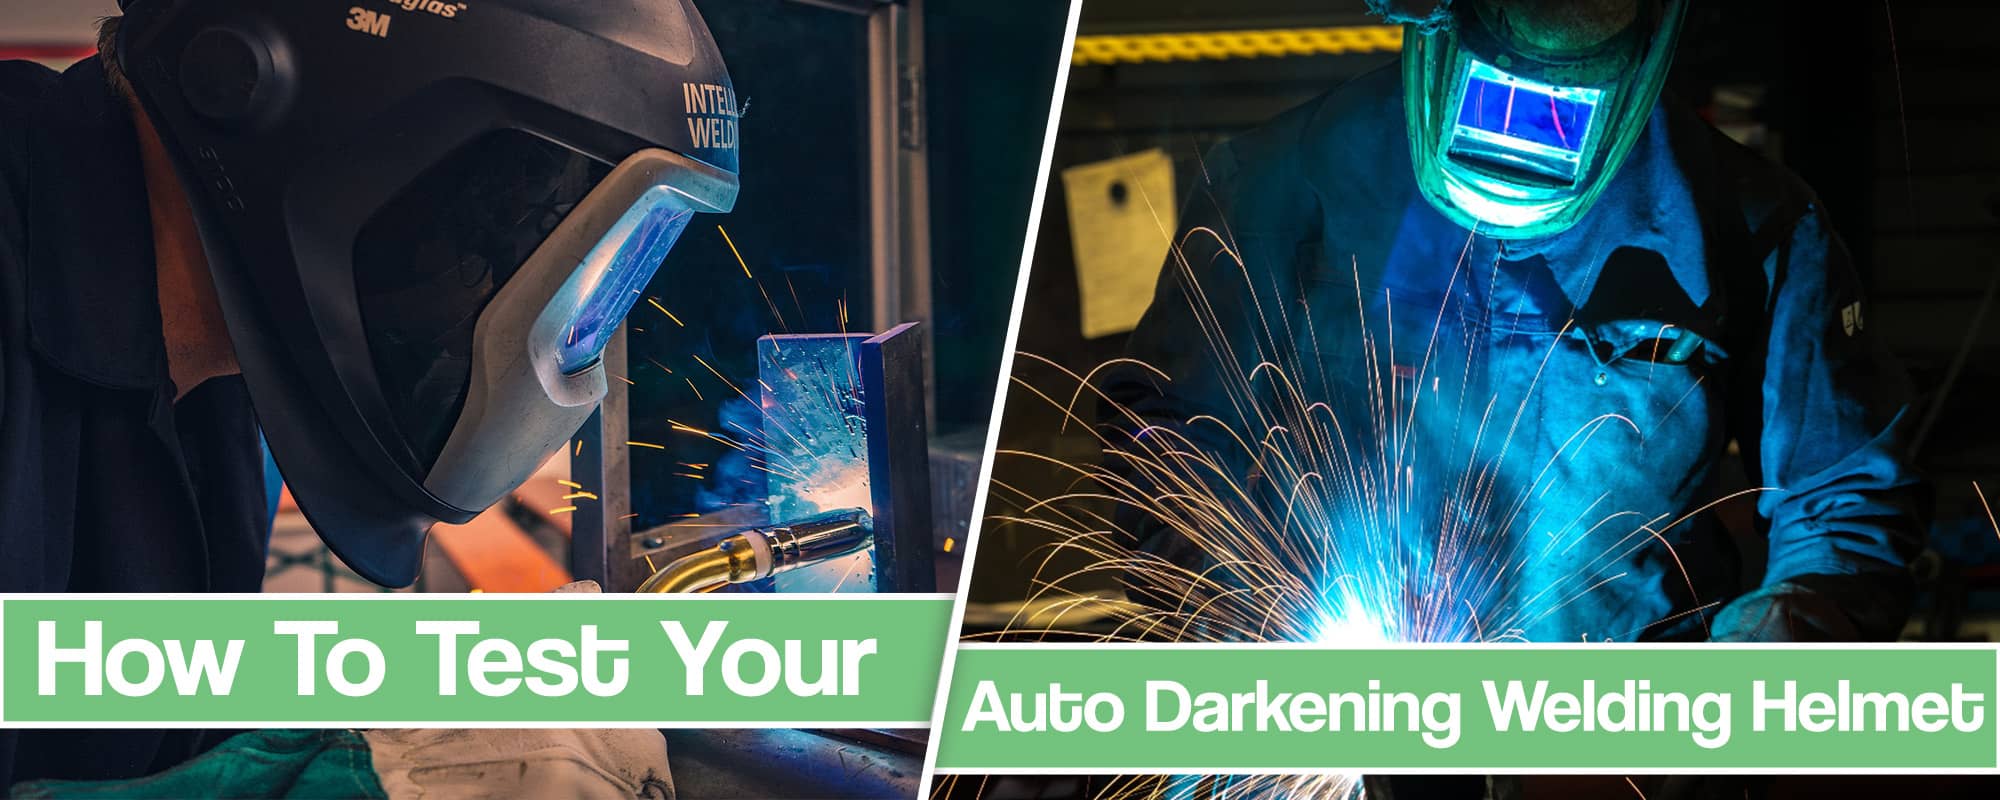 Feature image for How To Test Auto Darkening Welding Helmet article